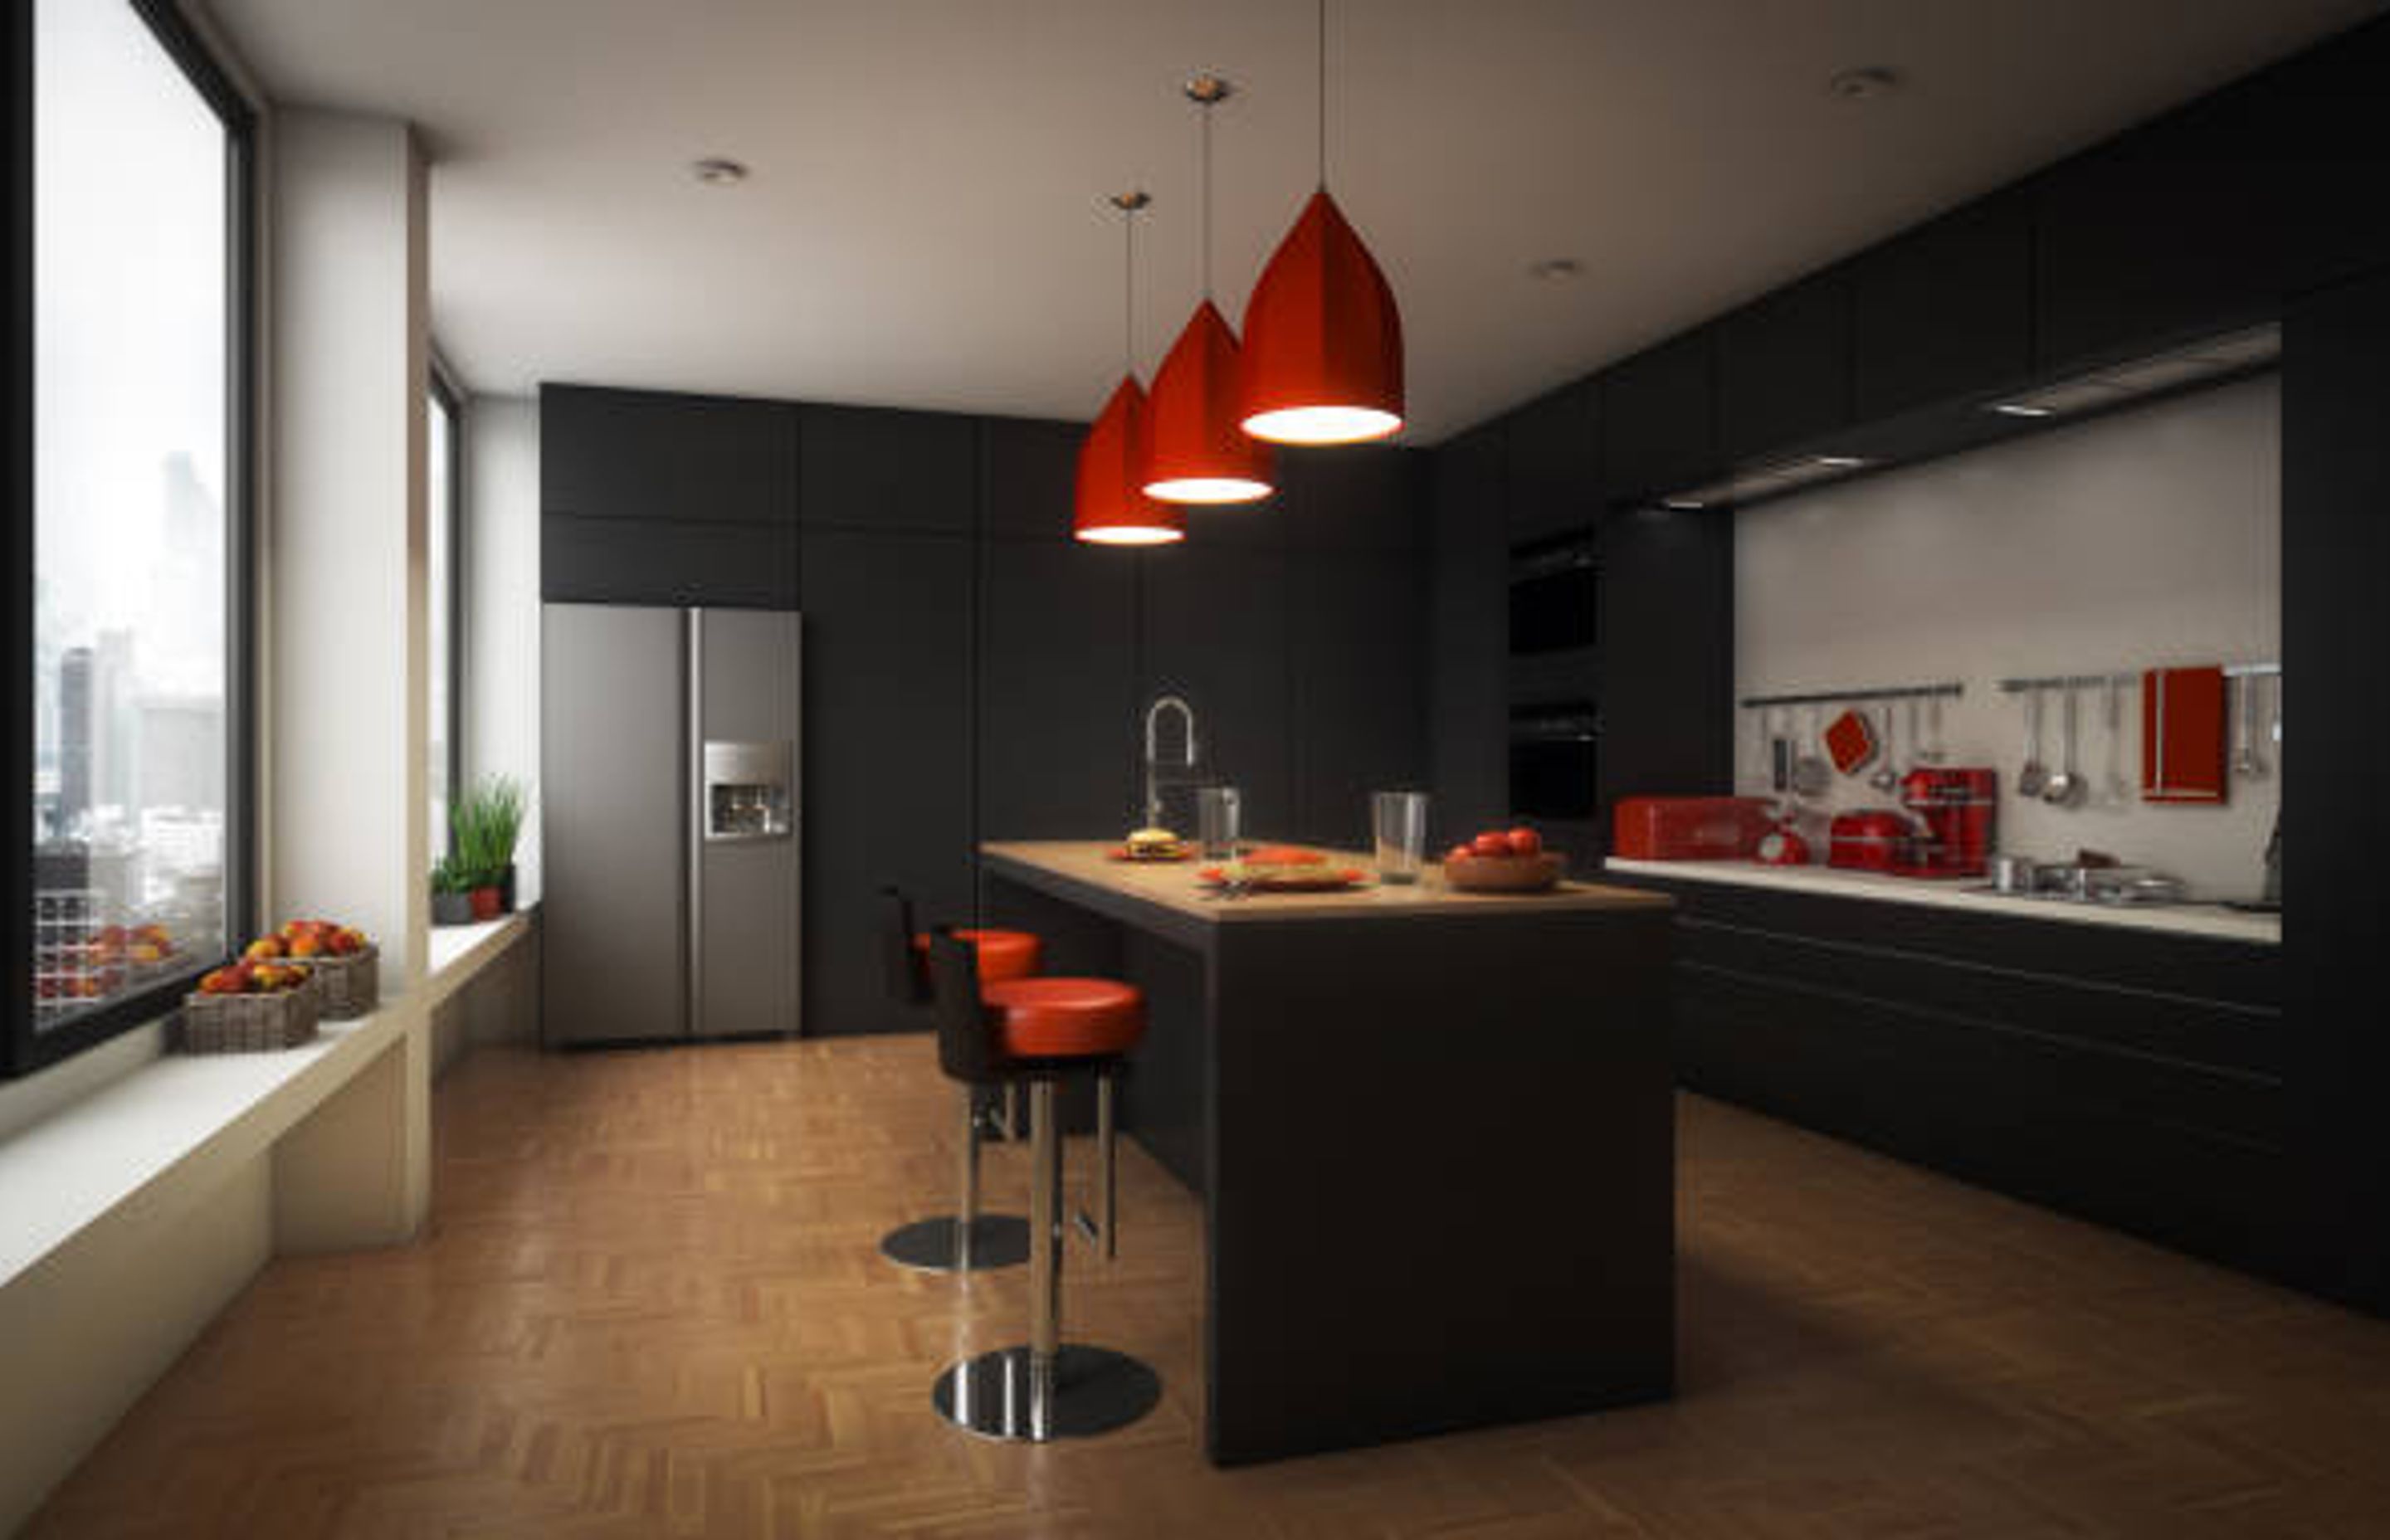 Black and red kitchen colour ideas | Photo Credit - iStock